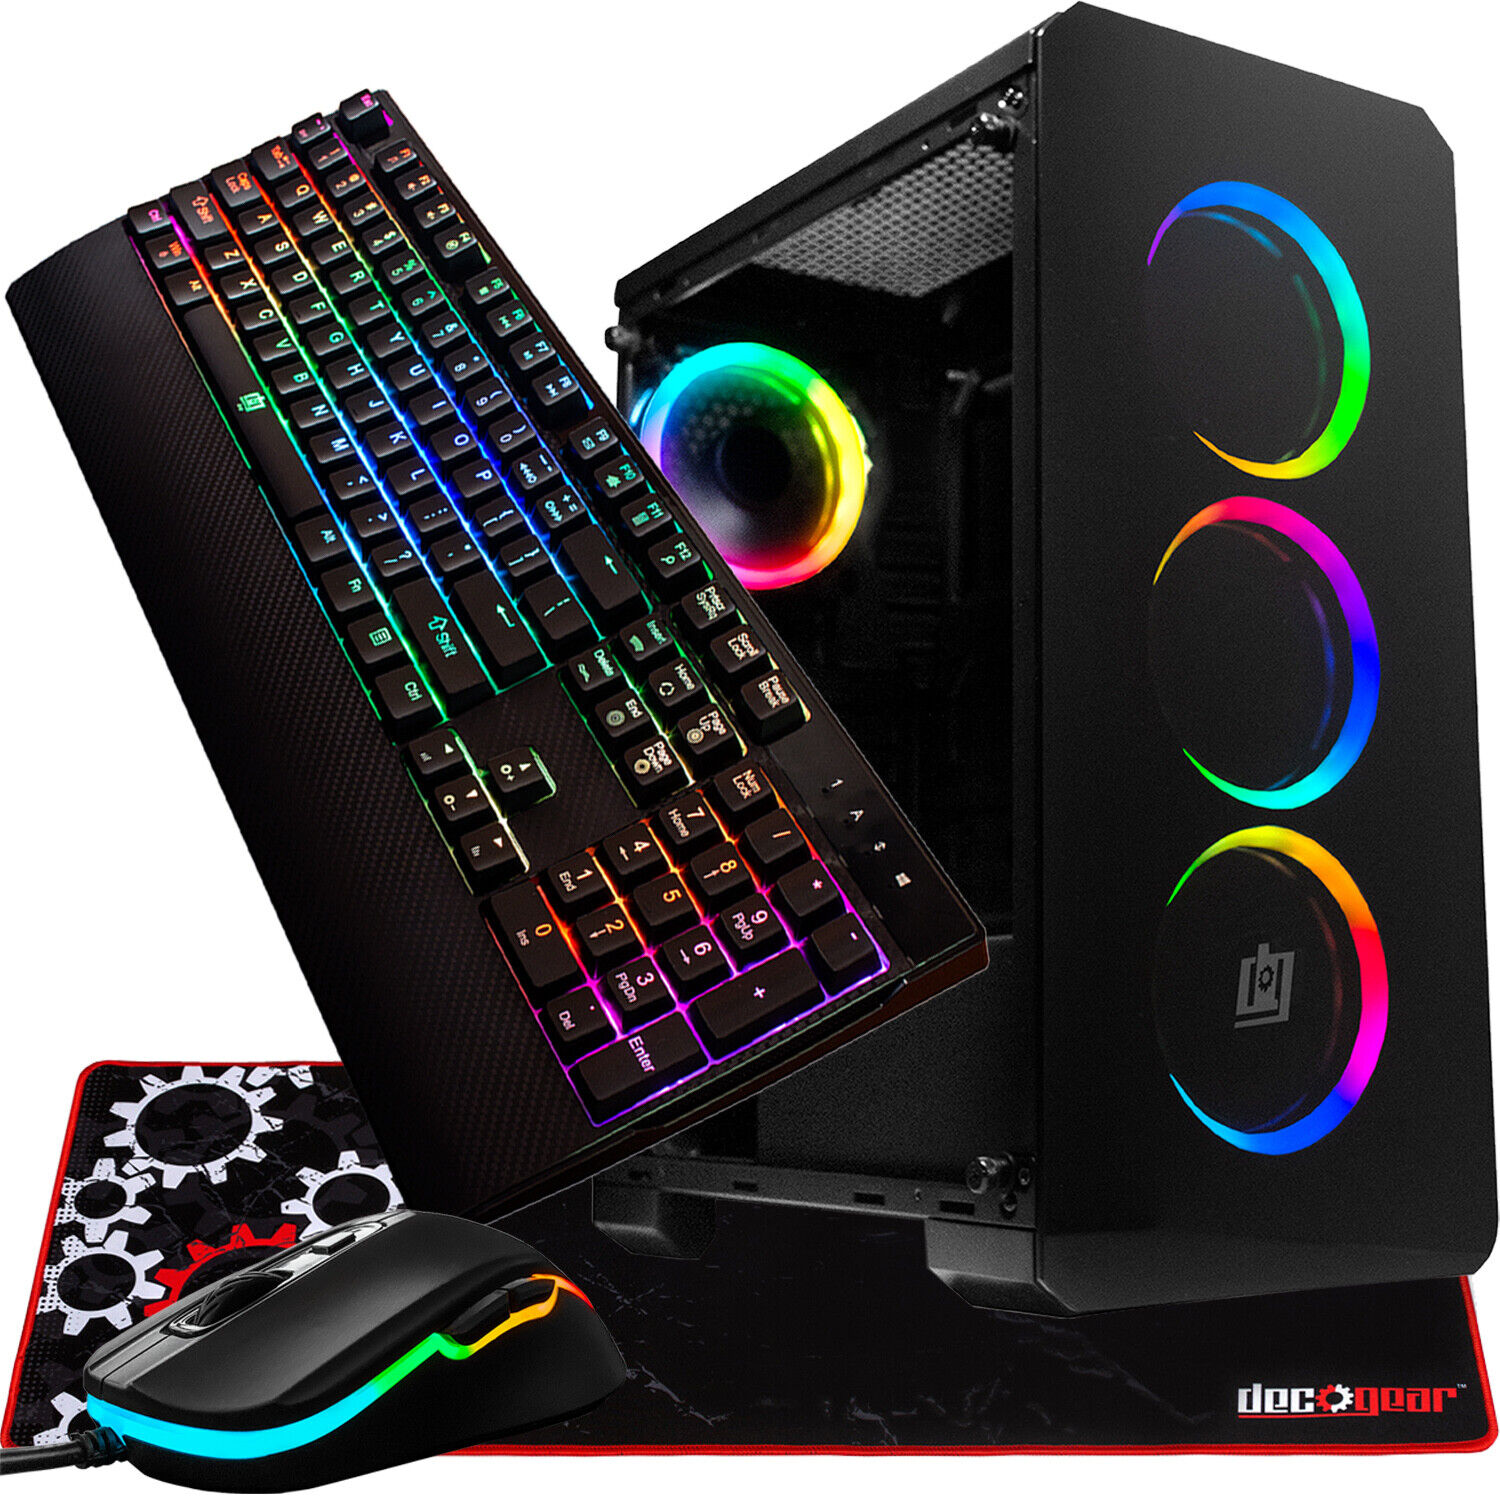 Deco Gear Desktop PC Starter Bundle - Tower, Mechanical Keyboard, Mouse, and Pad